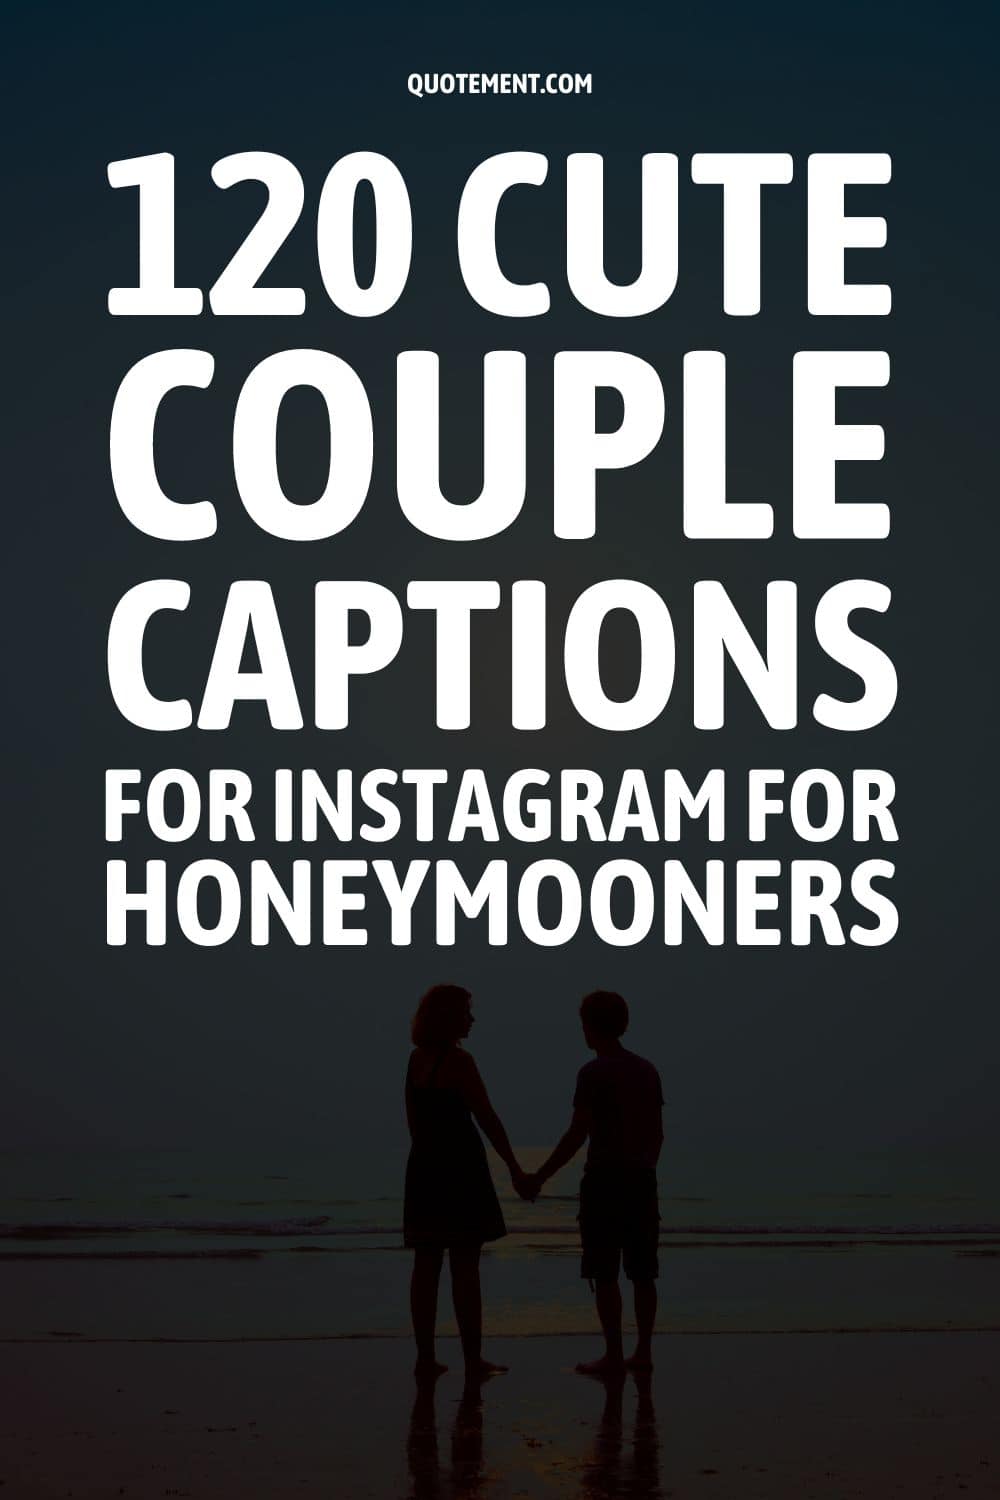 120 Cute Couple Captions For Instagram For Honeymooners
